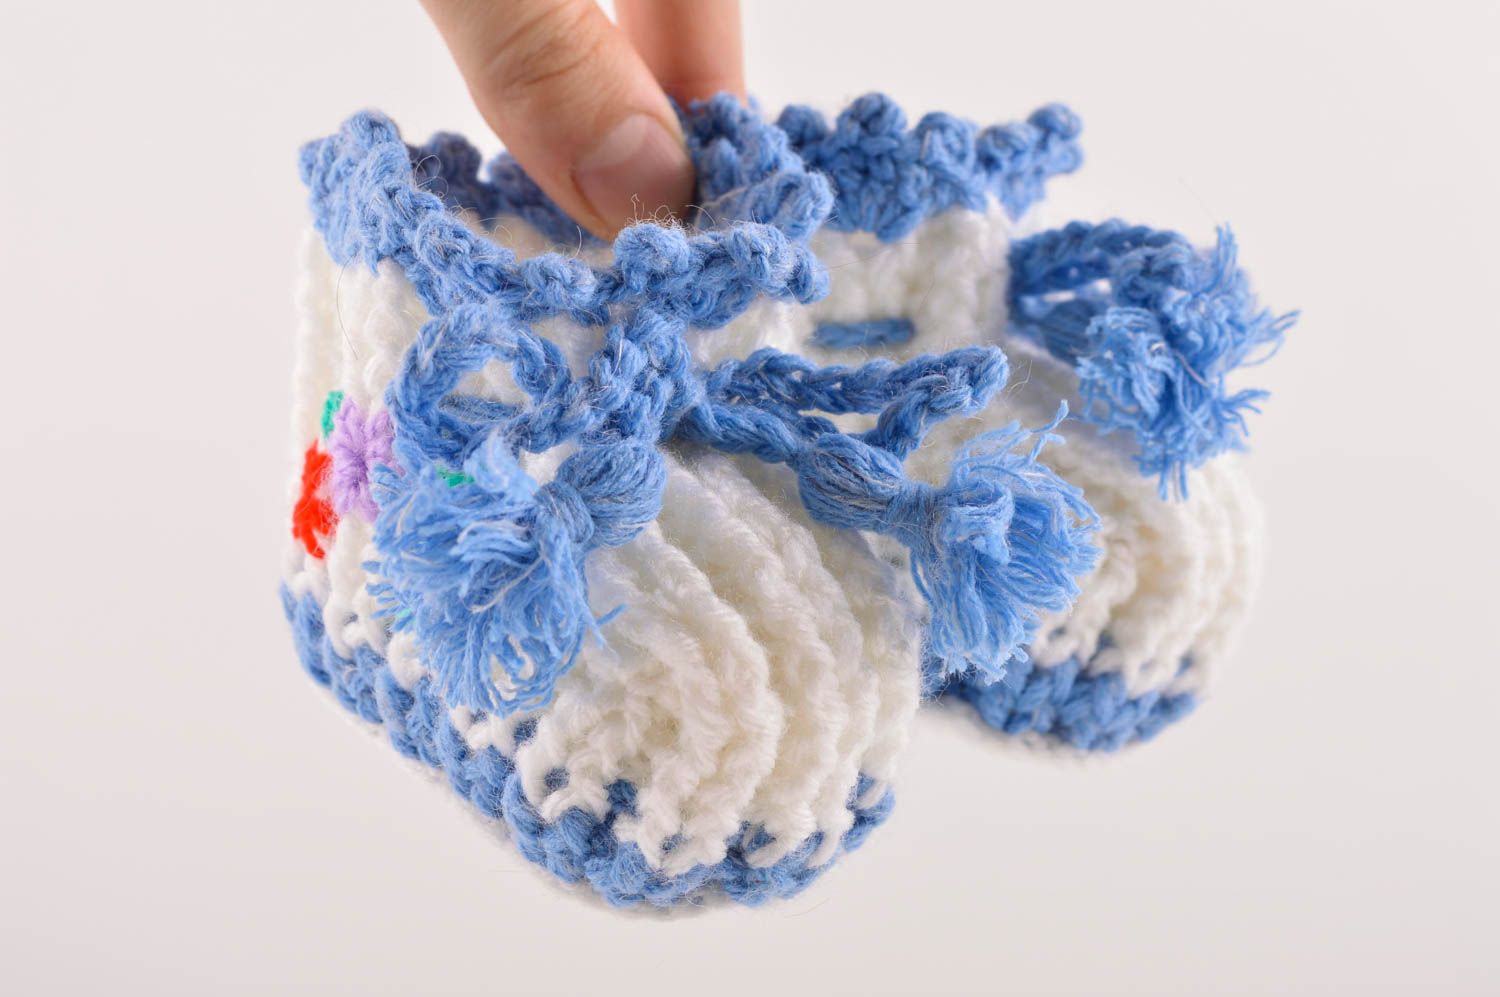 Homemade crochet baby shoes home shoes toddler shoes goods for toddlers photo 5